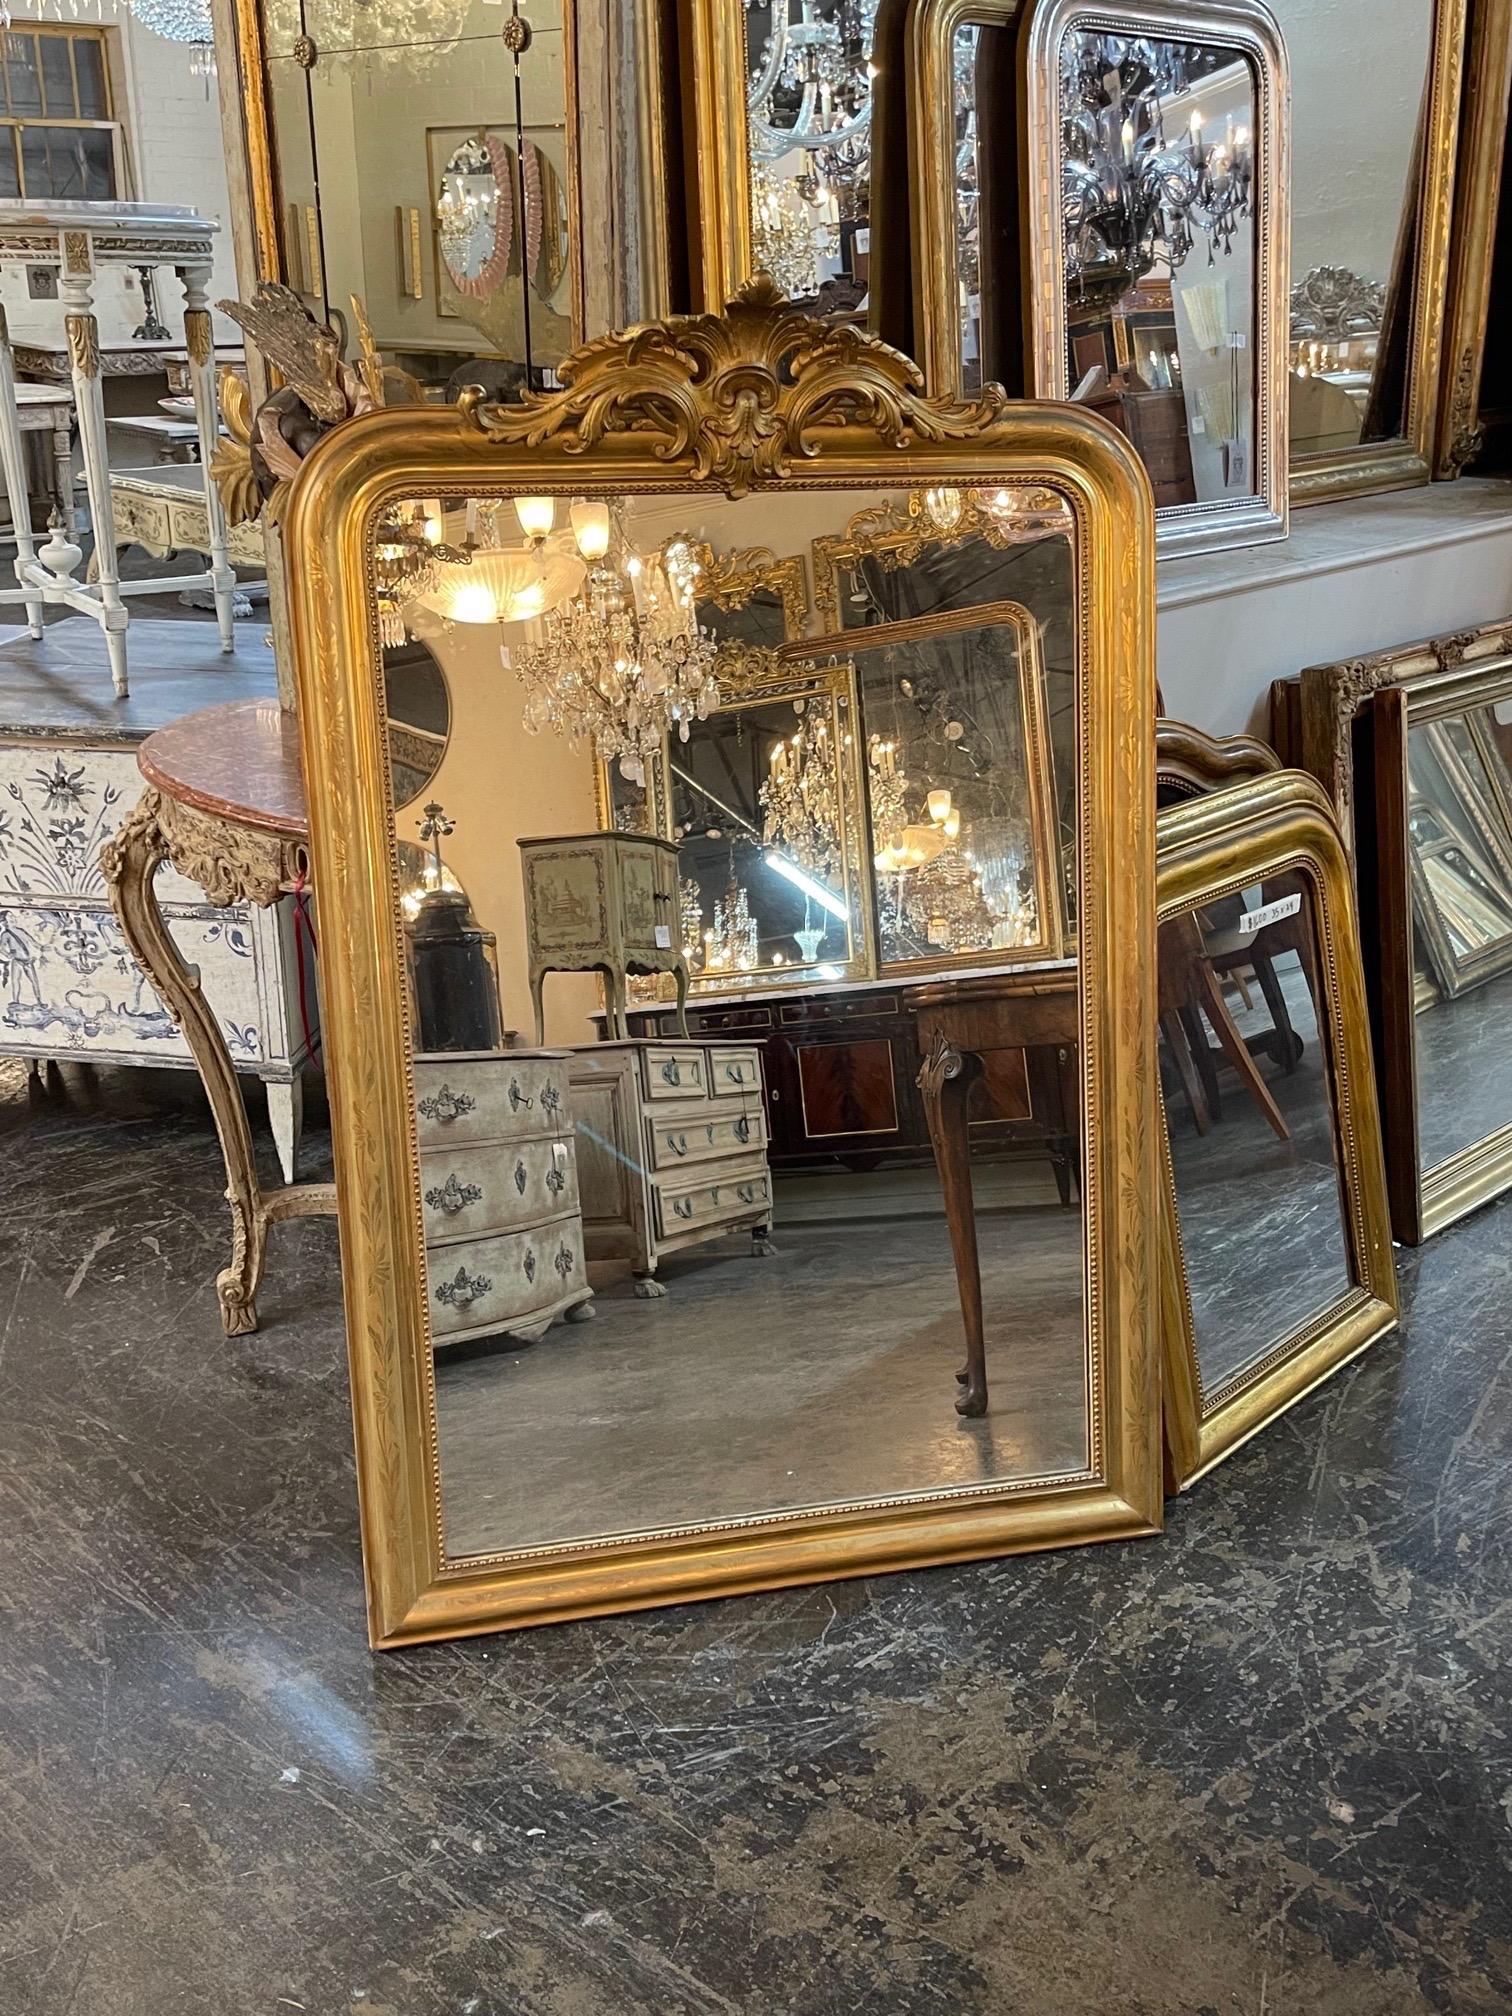 Very fine large scale French Louis Philippe mirror with a crest at the top. The piece also has a floral pattern along the sides and a beaded inner border. Lovely!